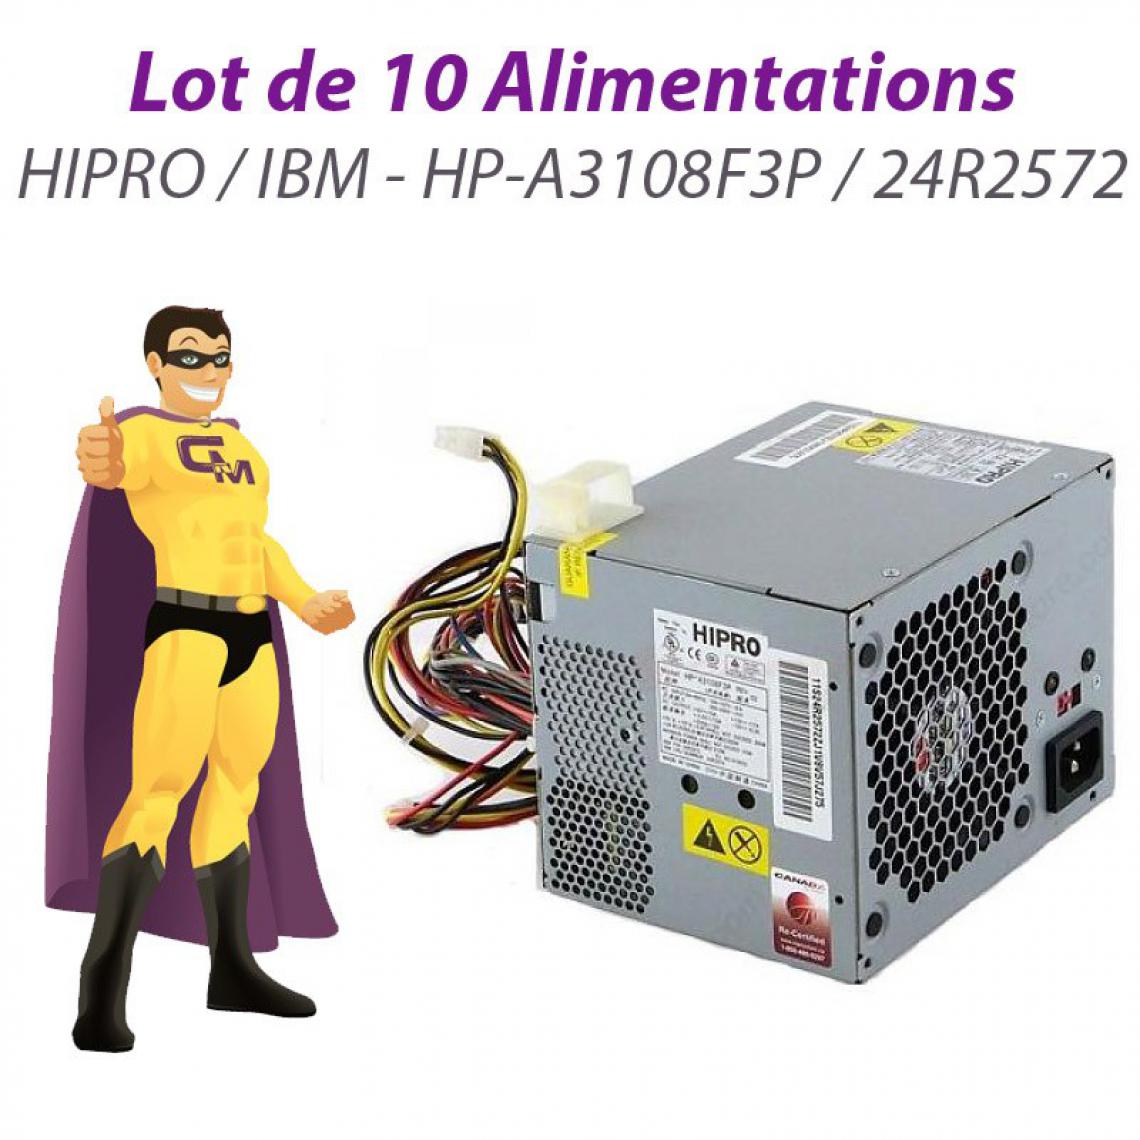 Hipro - Lot x10 Alimentations HIPRO HP-A3108F3P 310W 24R2572 IBM ThinkCentre 8142-CTO - Alimentation modulaire